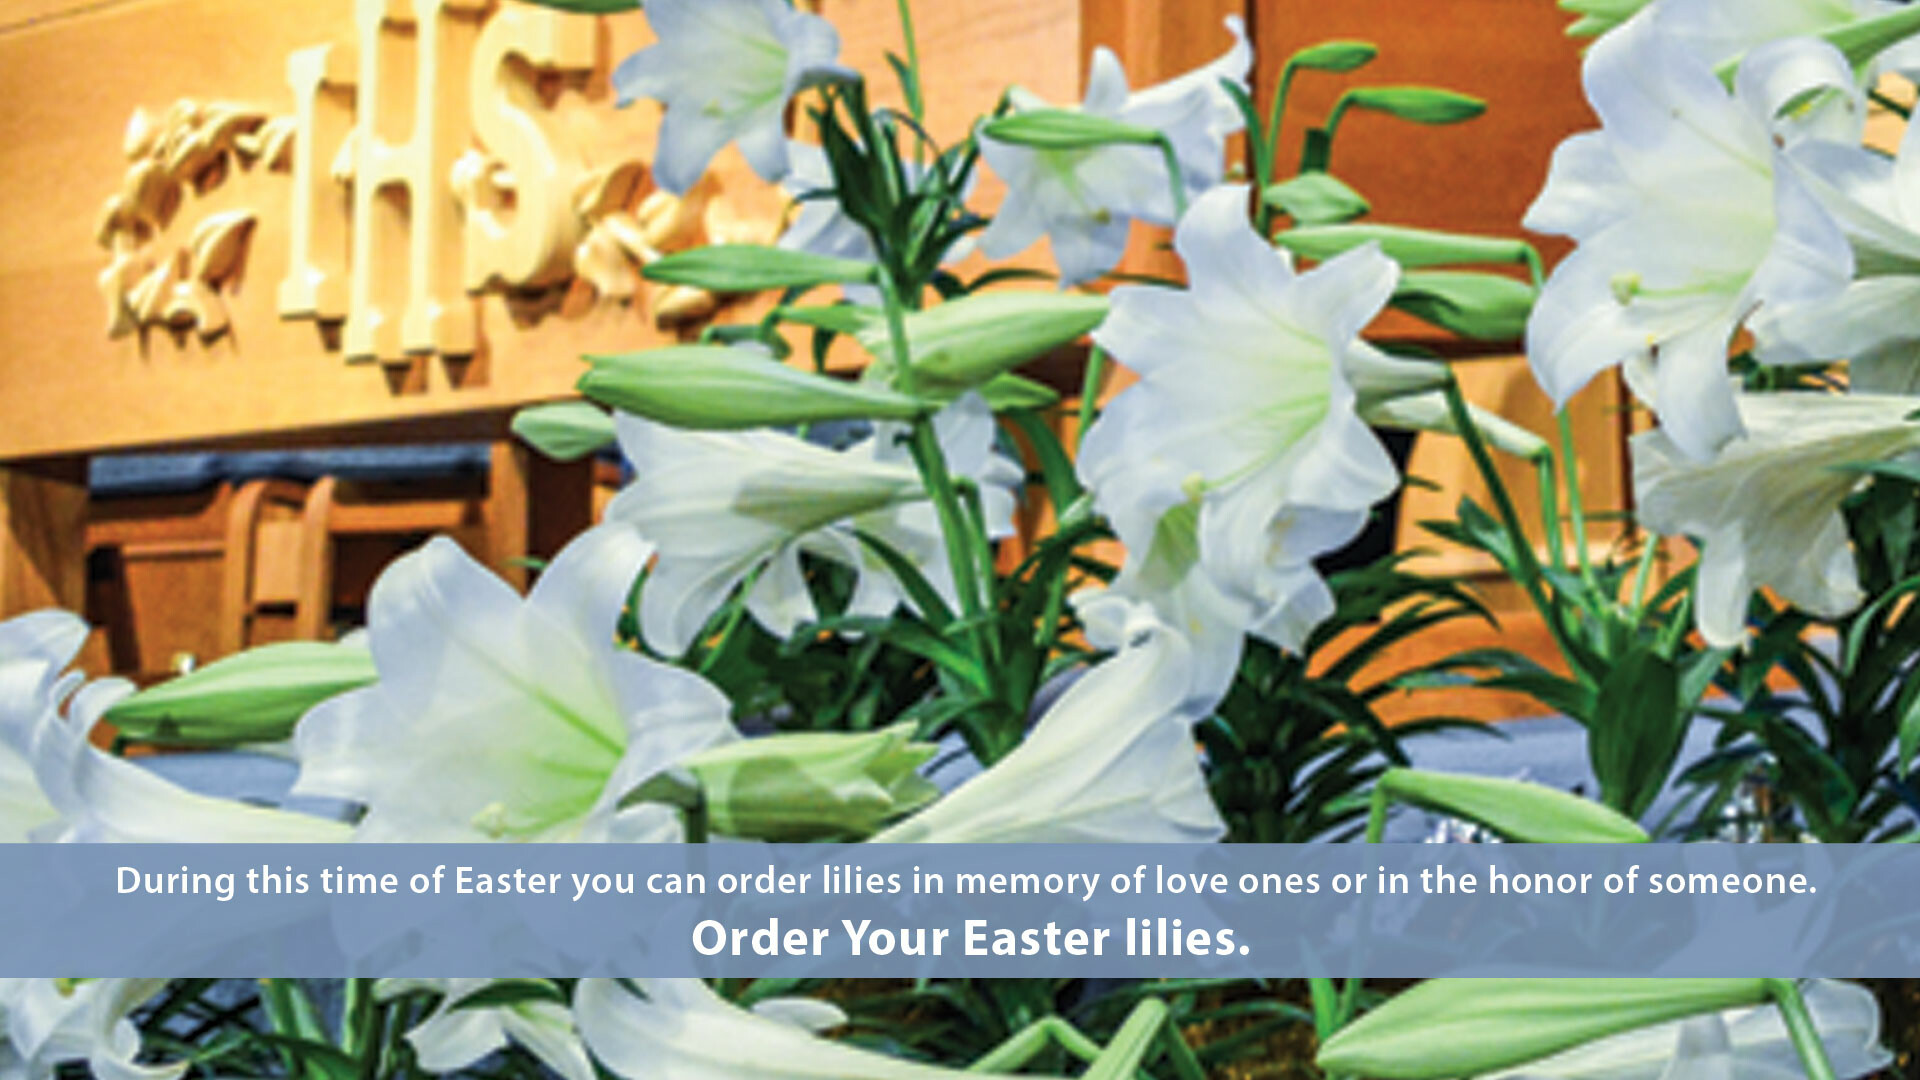 Order Your Easter Lilies